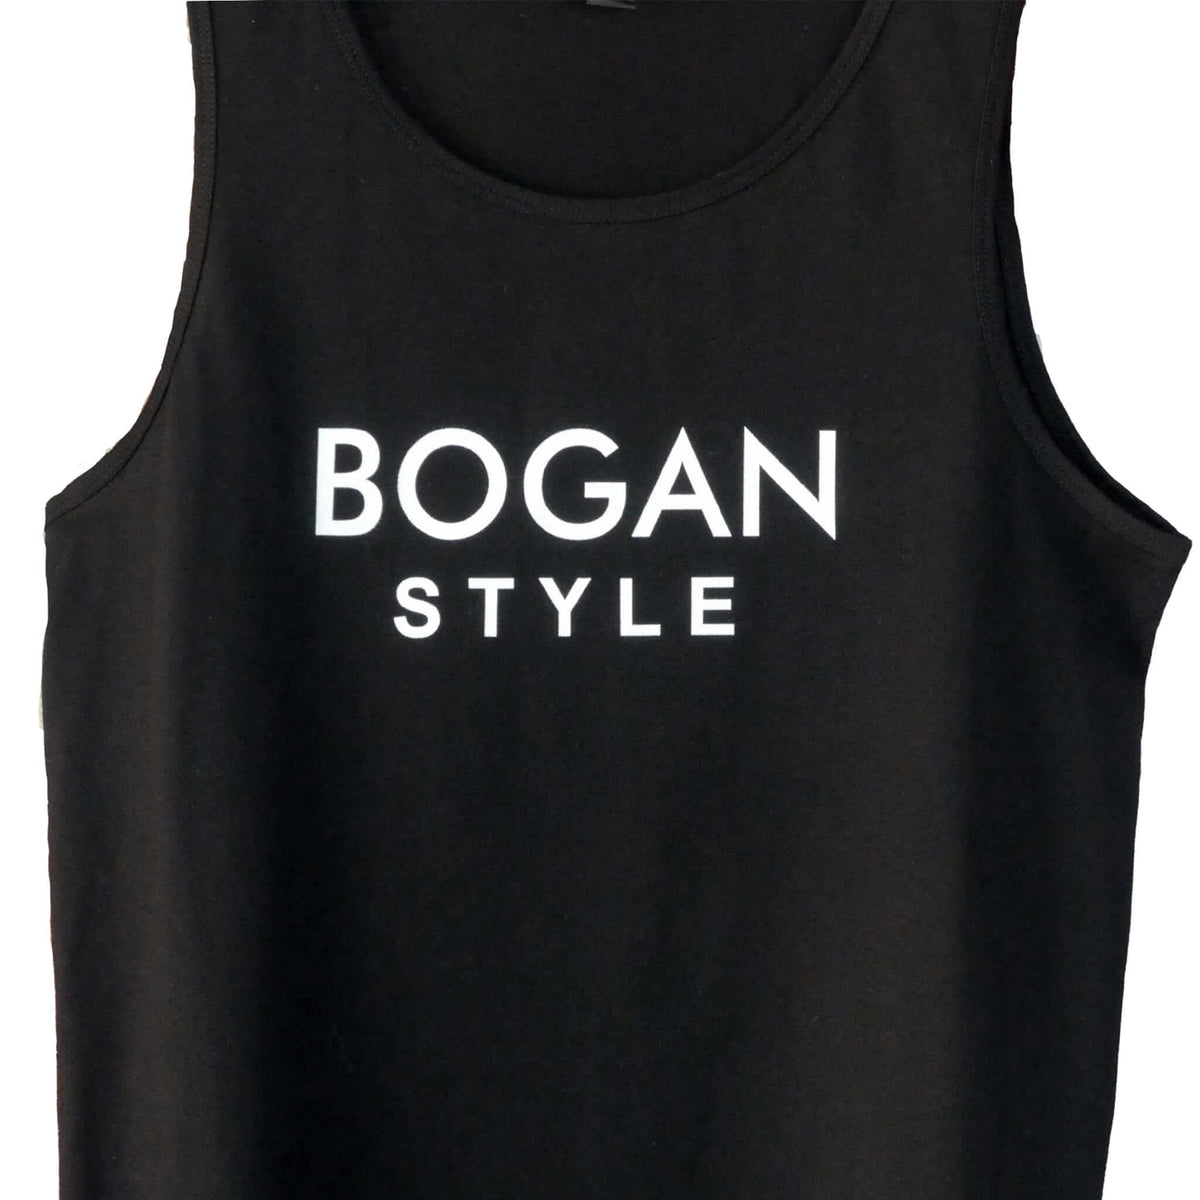 men's black singlet with Bogan Style in white letters on the front.